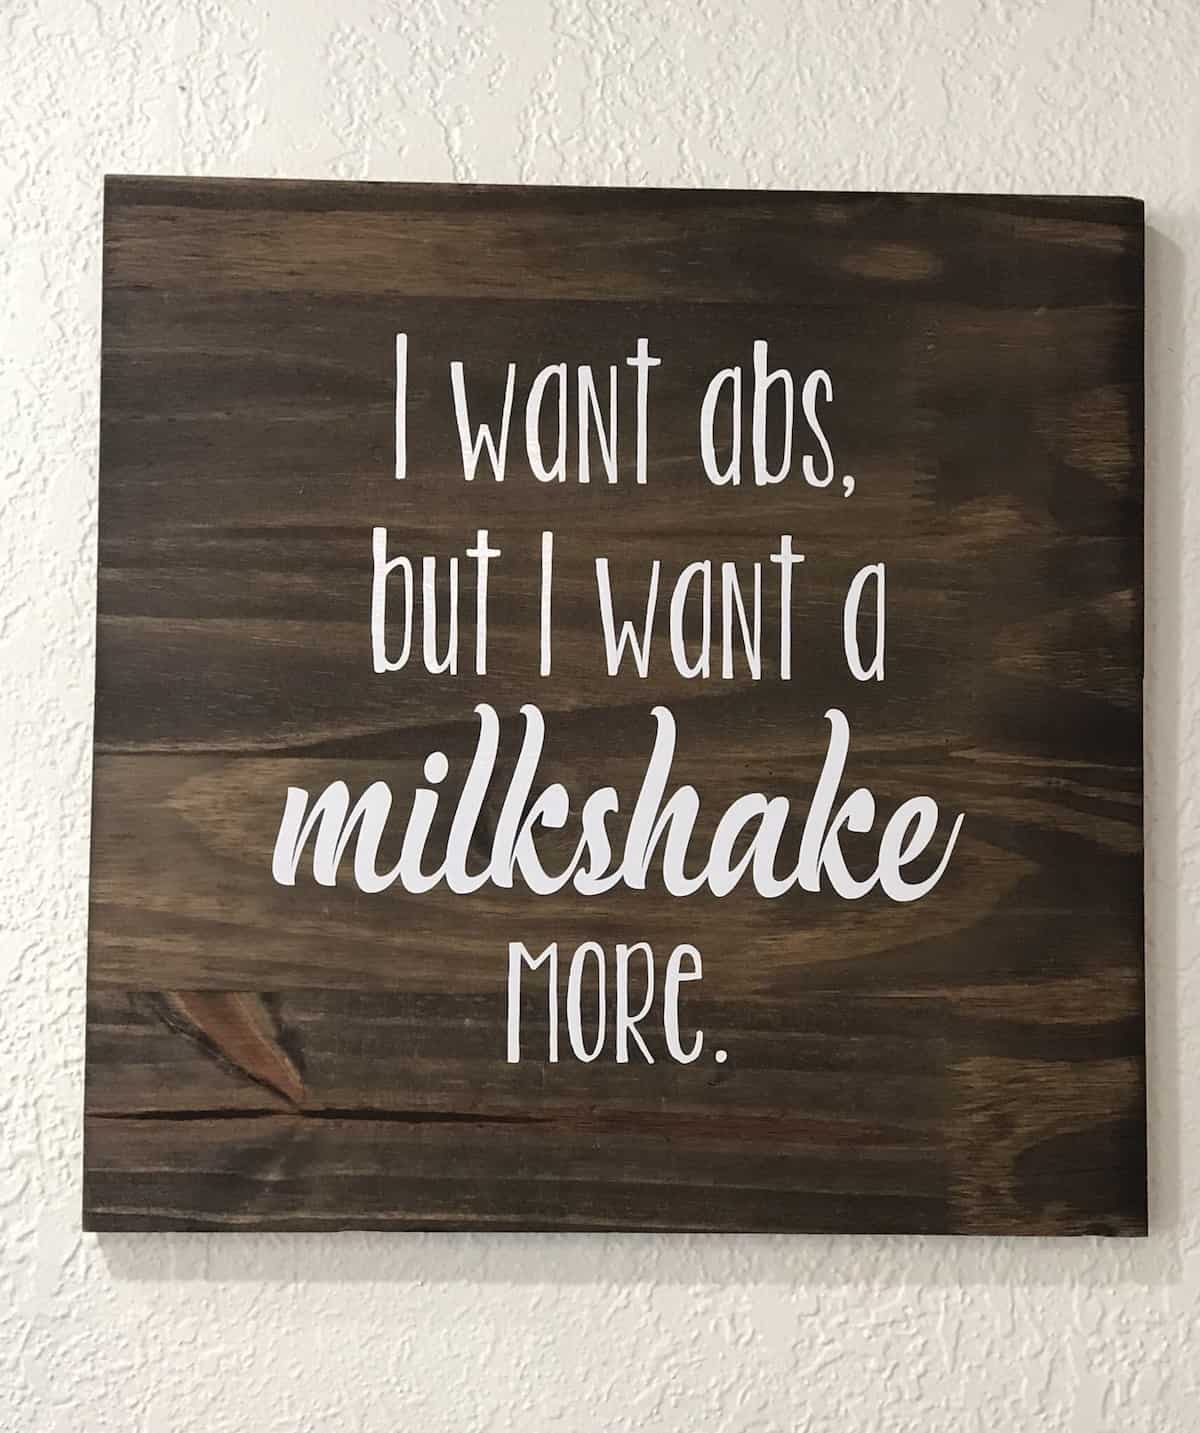 Sign that says I want abs but I want a milkshake more.